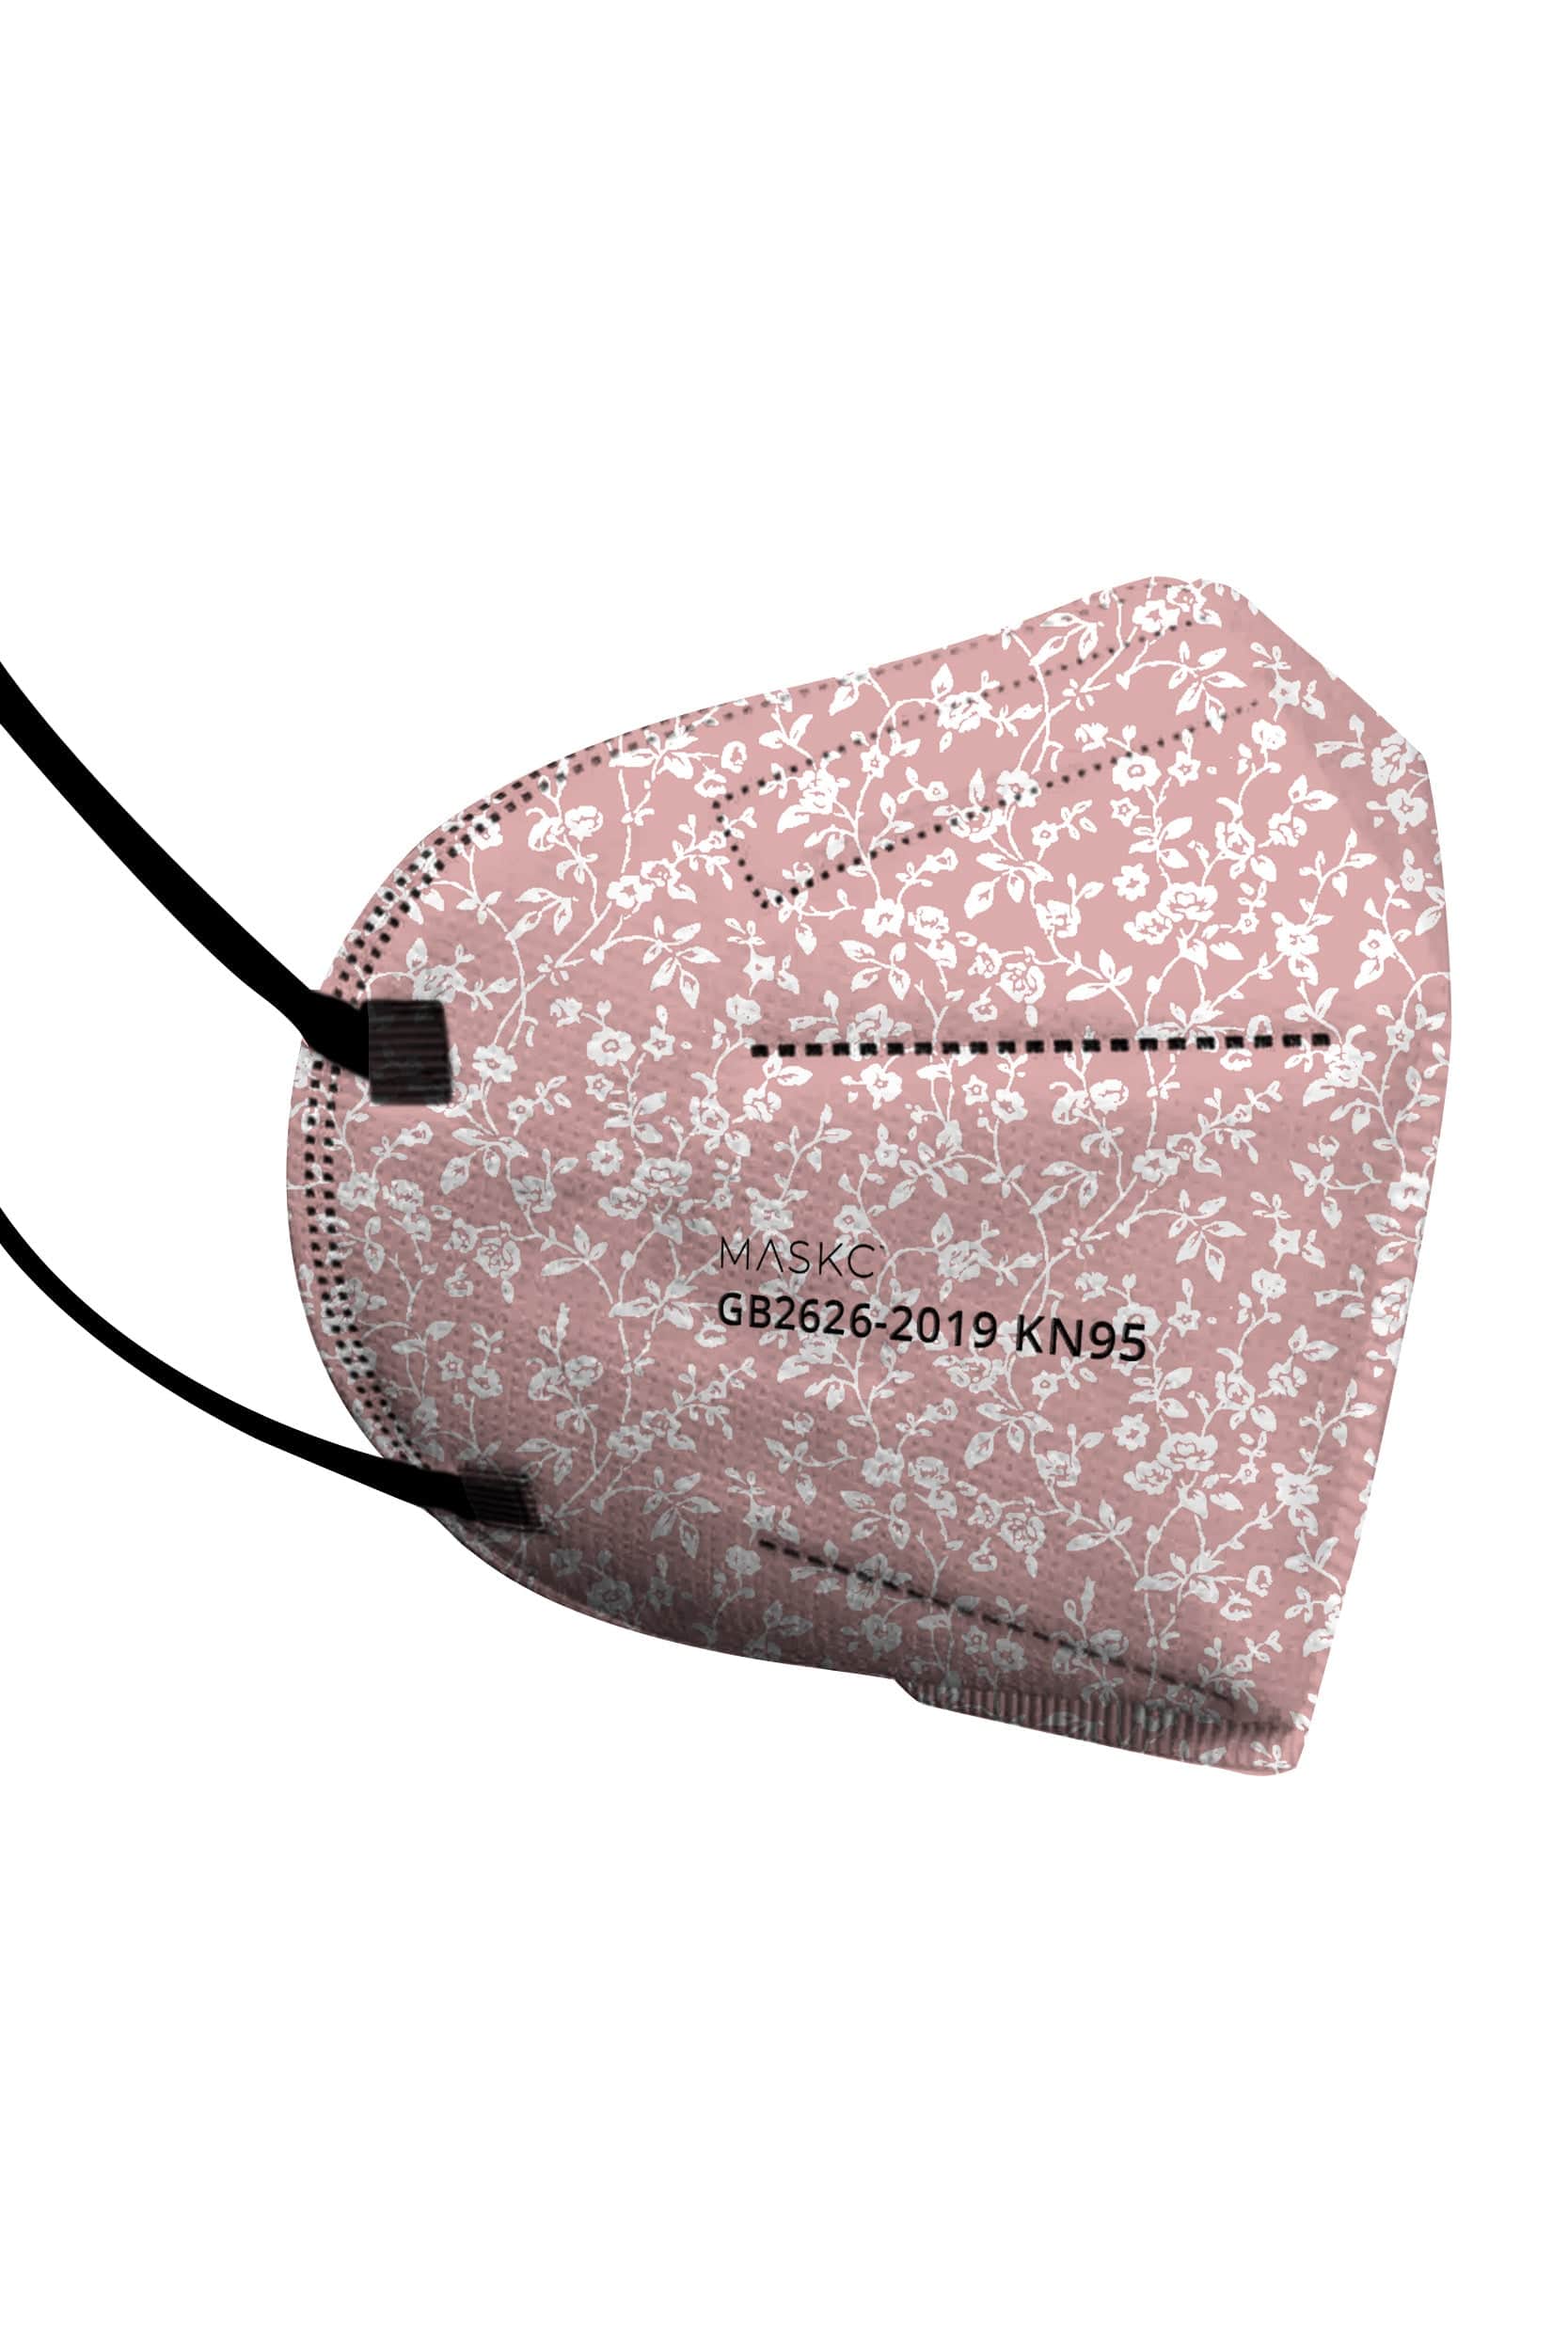 Stylish Pink Floral KN95 face mask, with soft black ear loops and high quality fabric. 